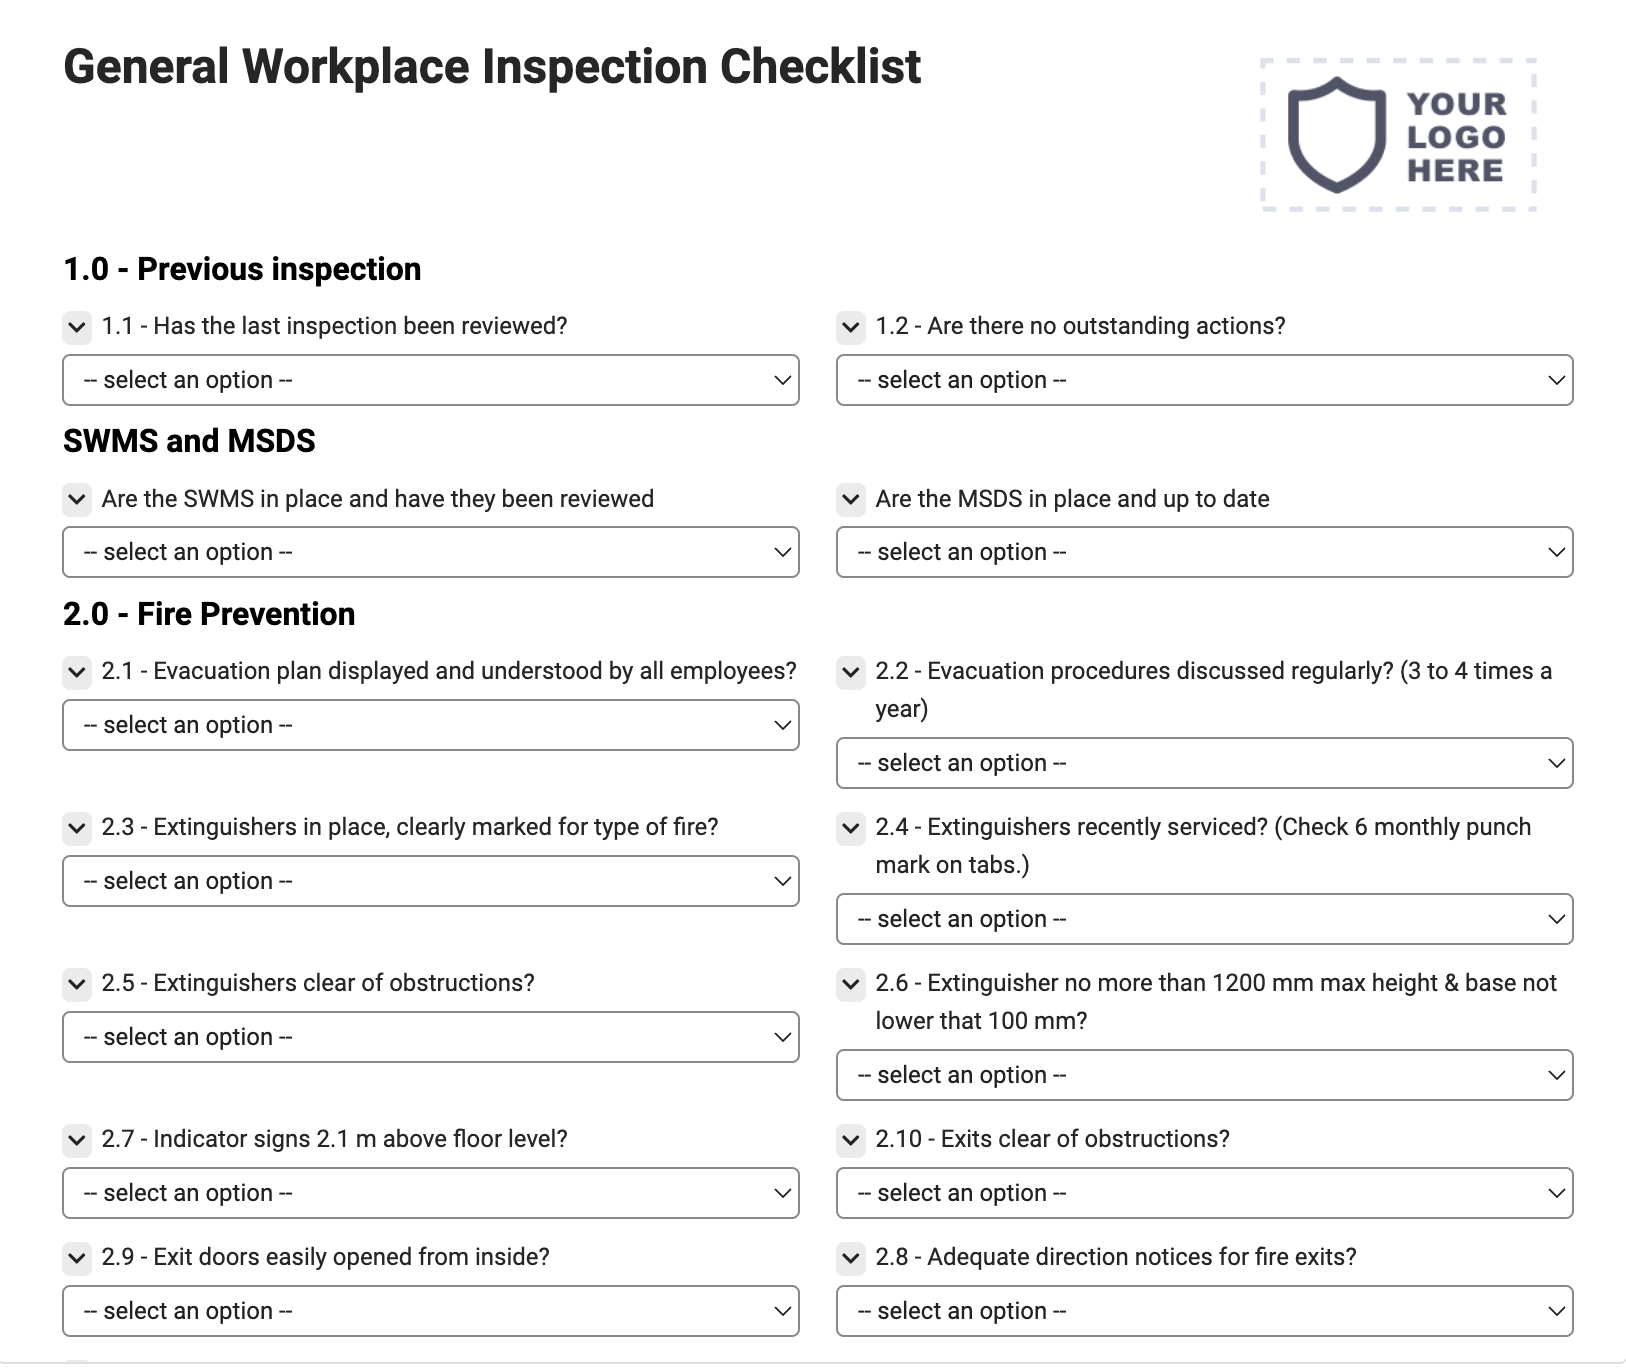 General Workplace Inspection Checklist